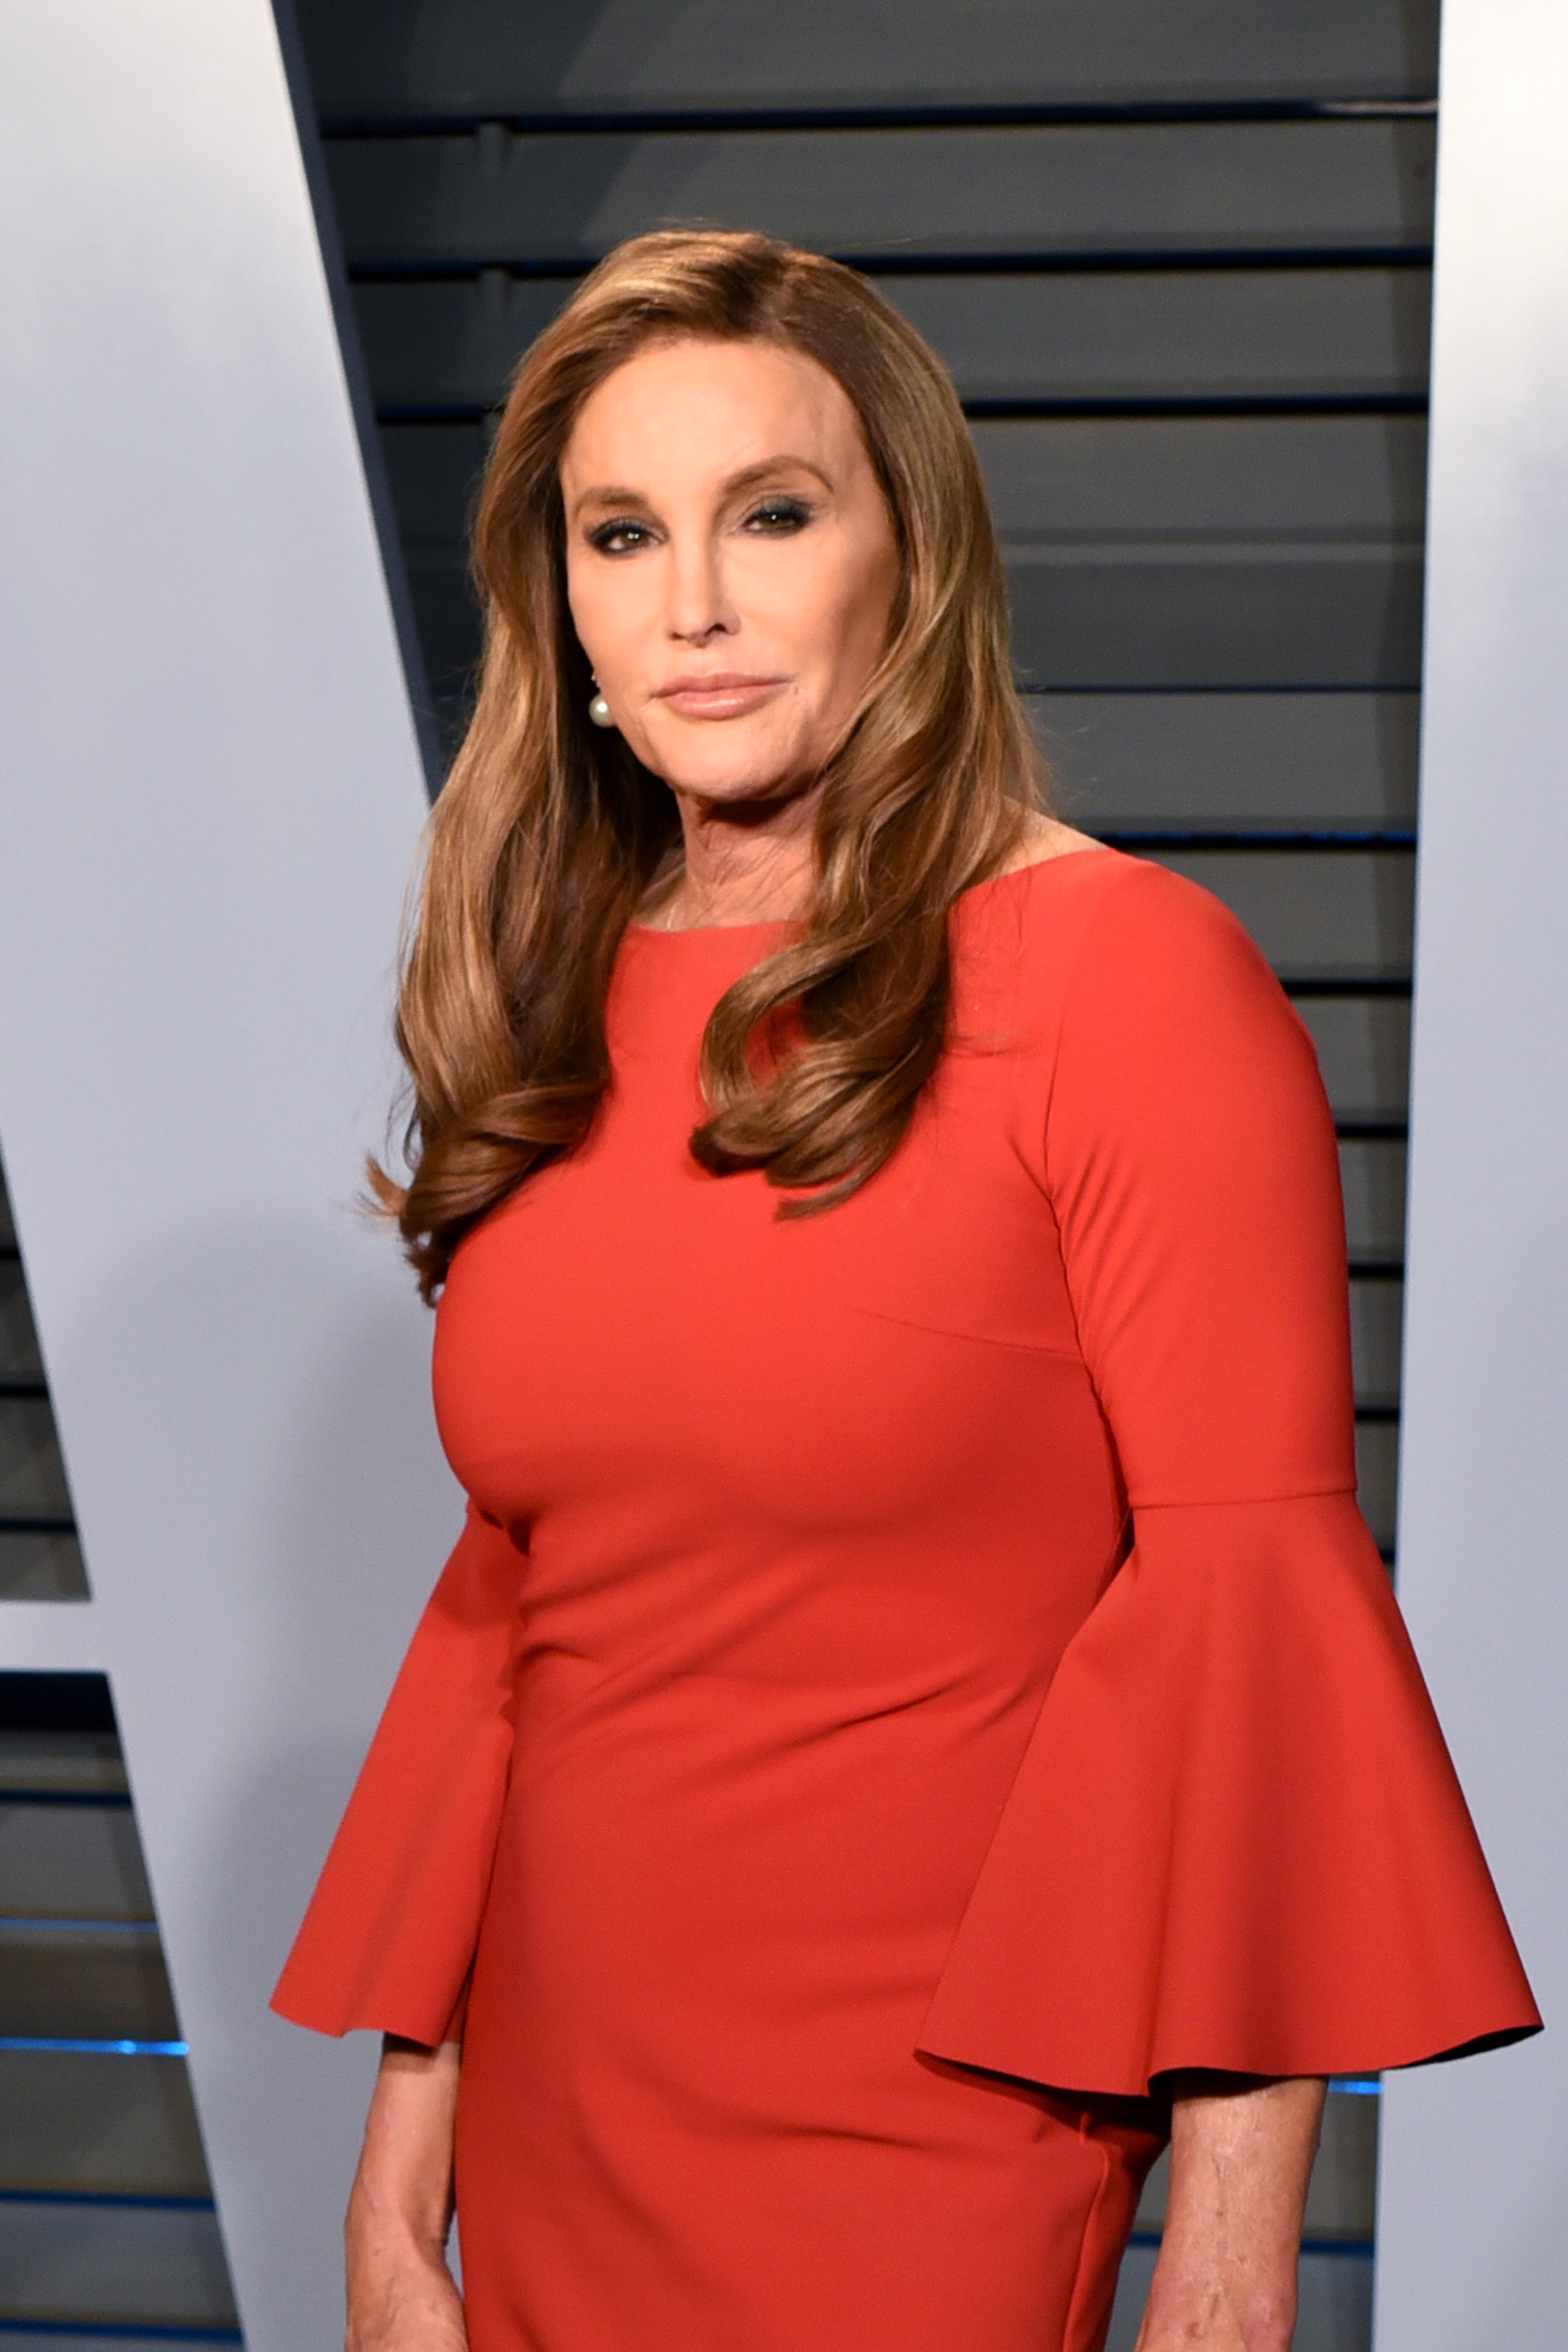 Caitlyn Jenner at the Vanity Fair Oscar Party in Beverly Hills, California on March 4, 2018 | Source: Getty Images